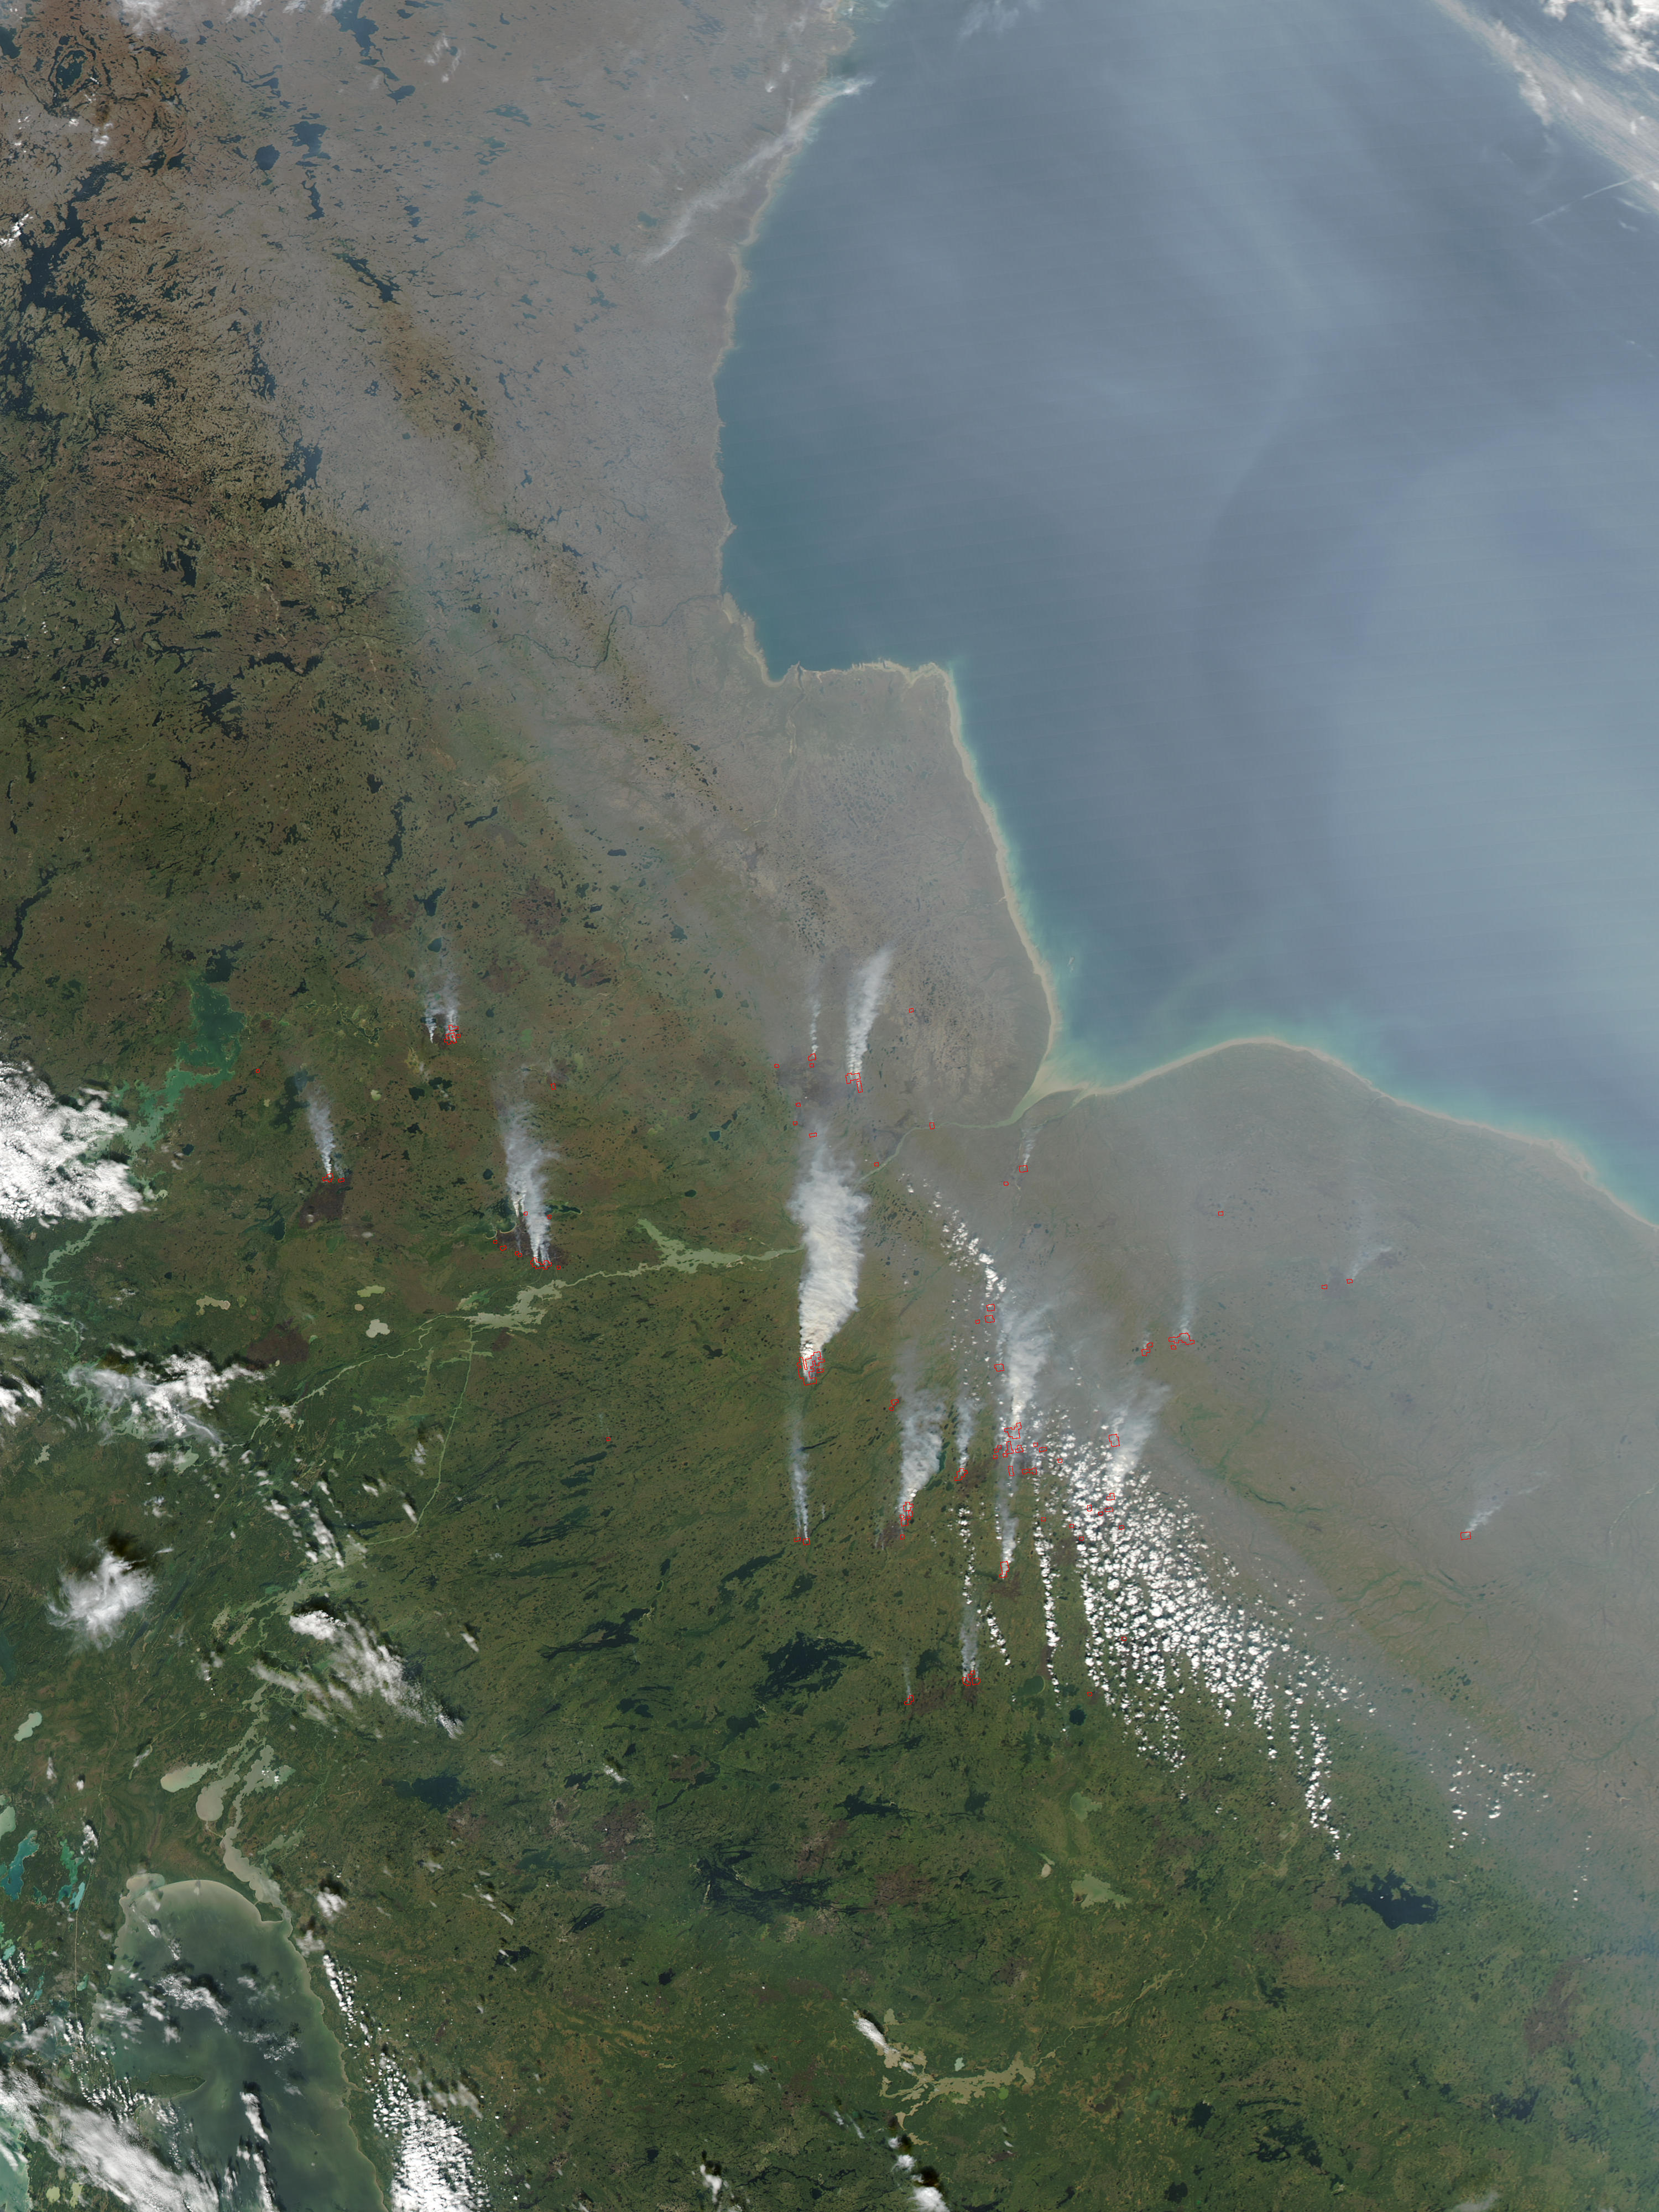 Fires and smoke in Manitoba, Canada - related image preview